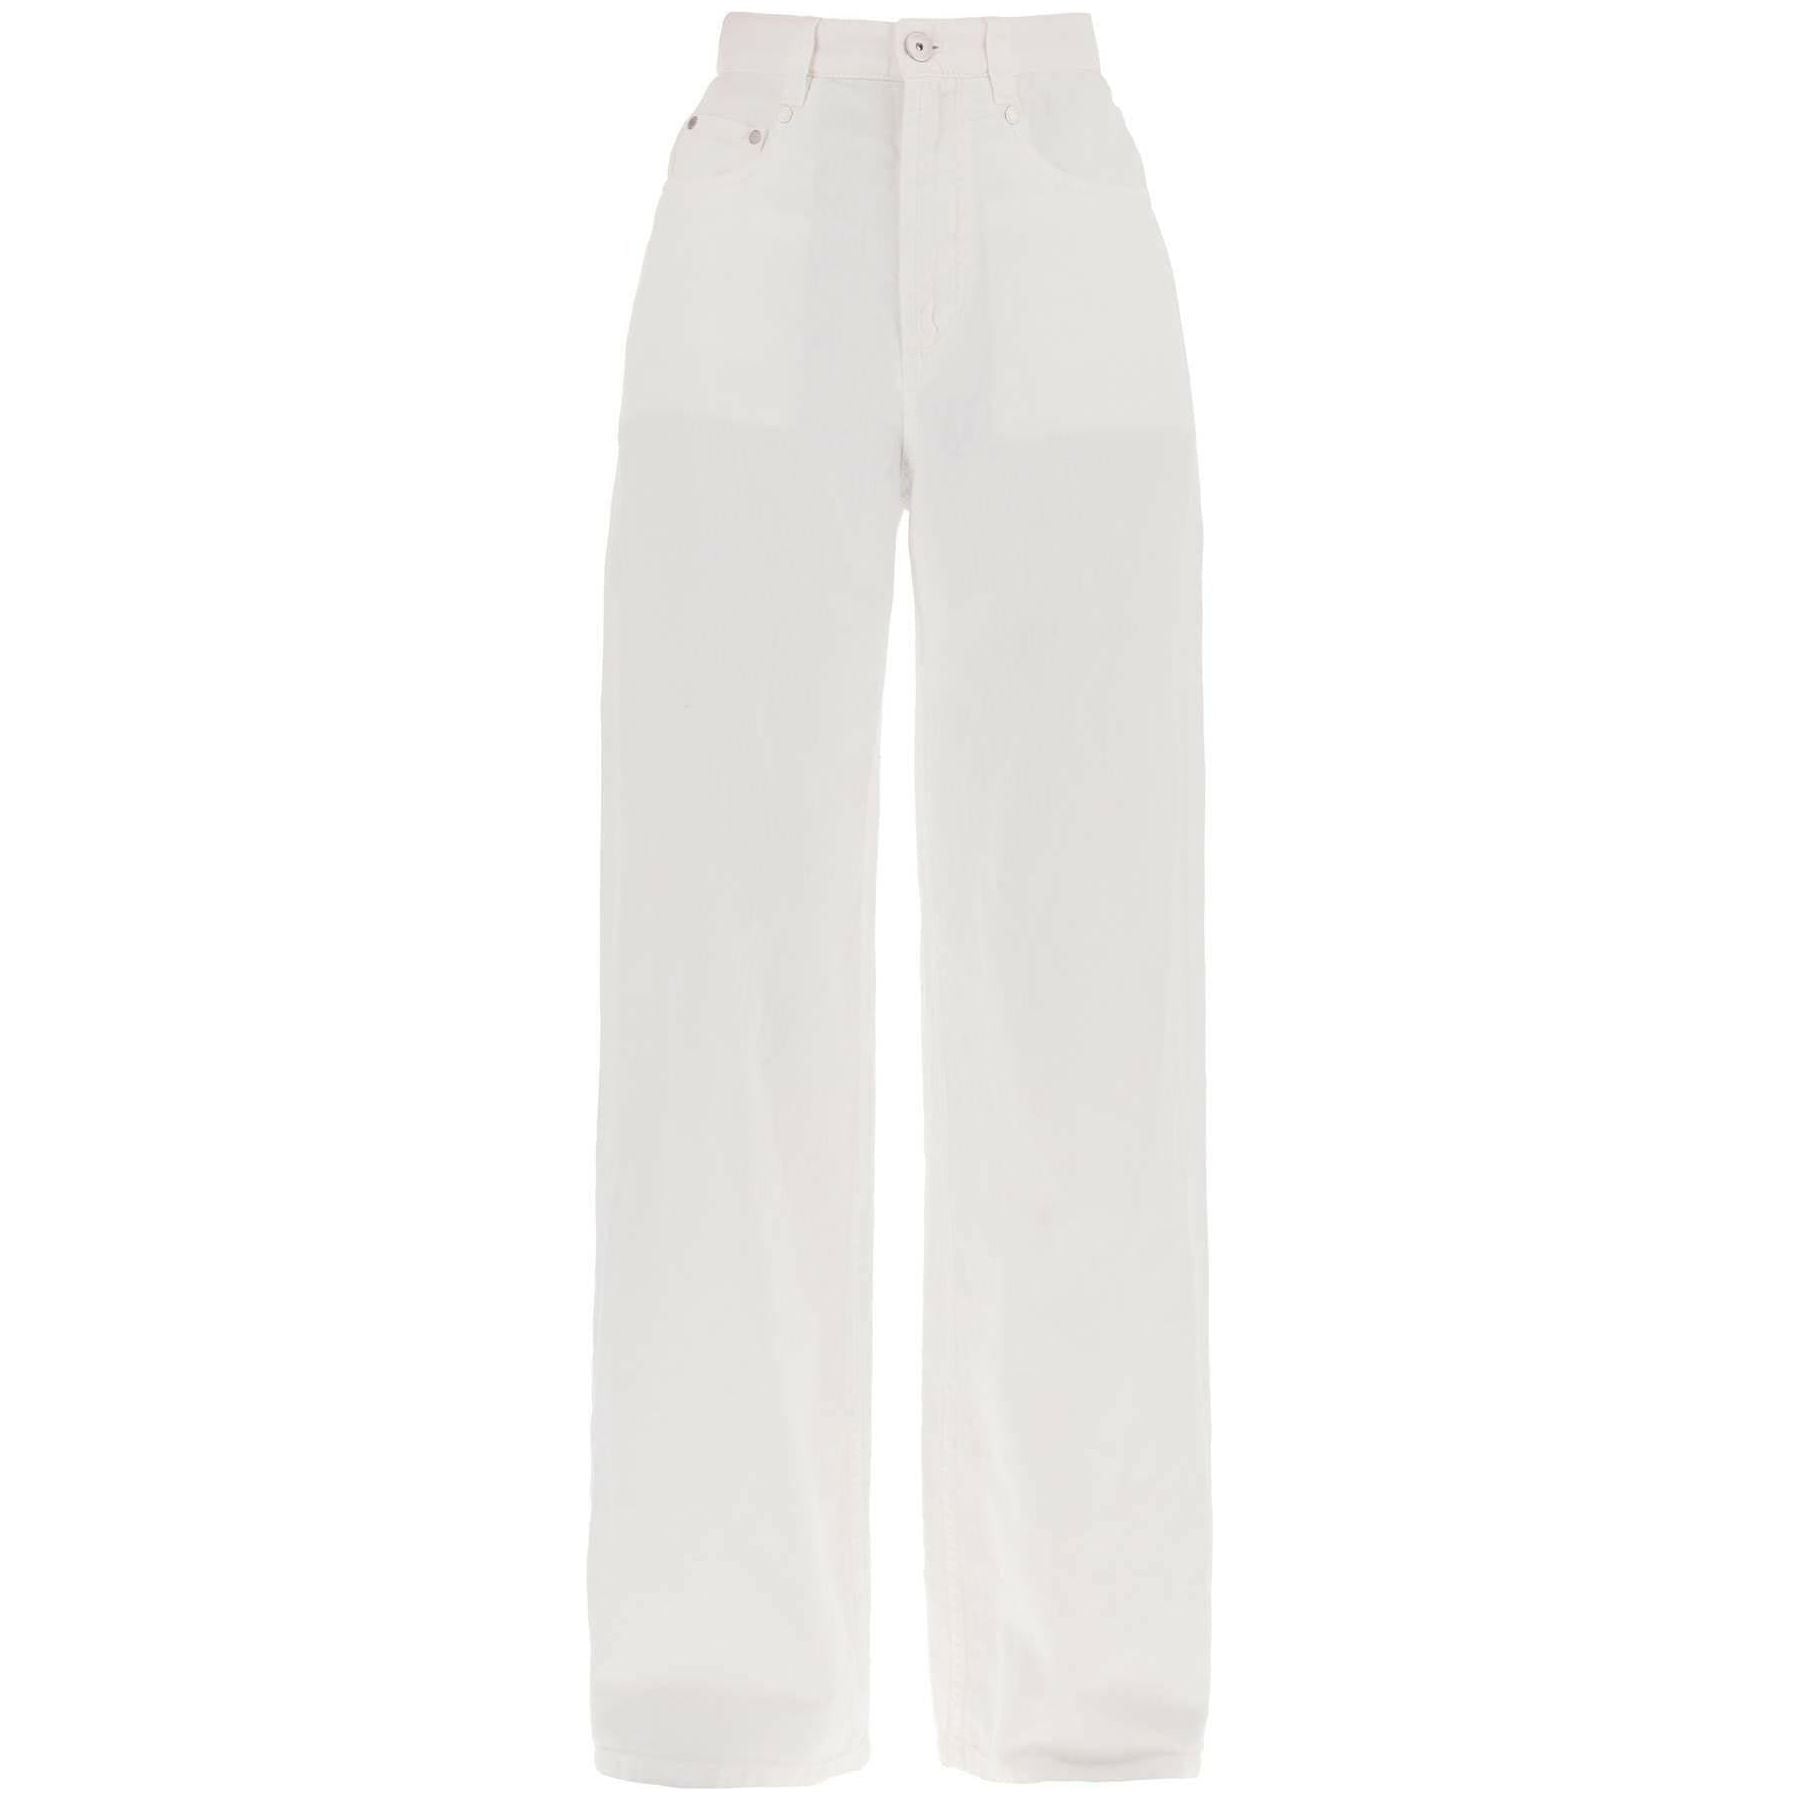 white Garment-Dyed Cotton and Linen Relaxed Trousers BRUNELLO CUCINELLI JOHN JULIA.